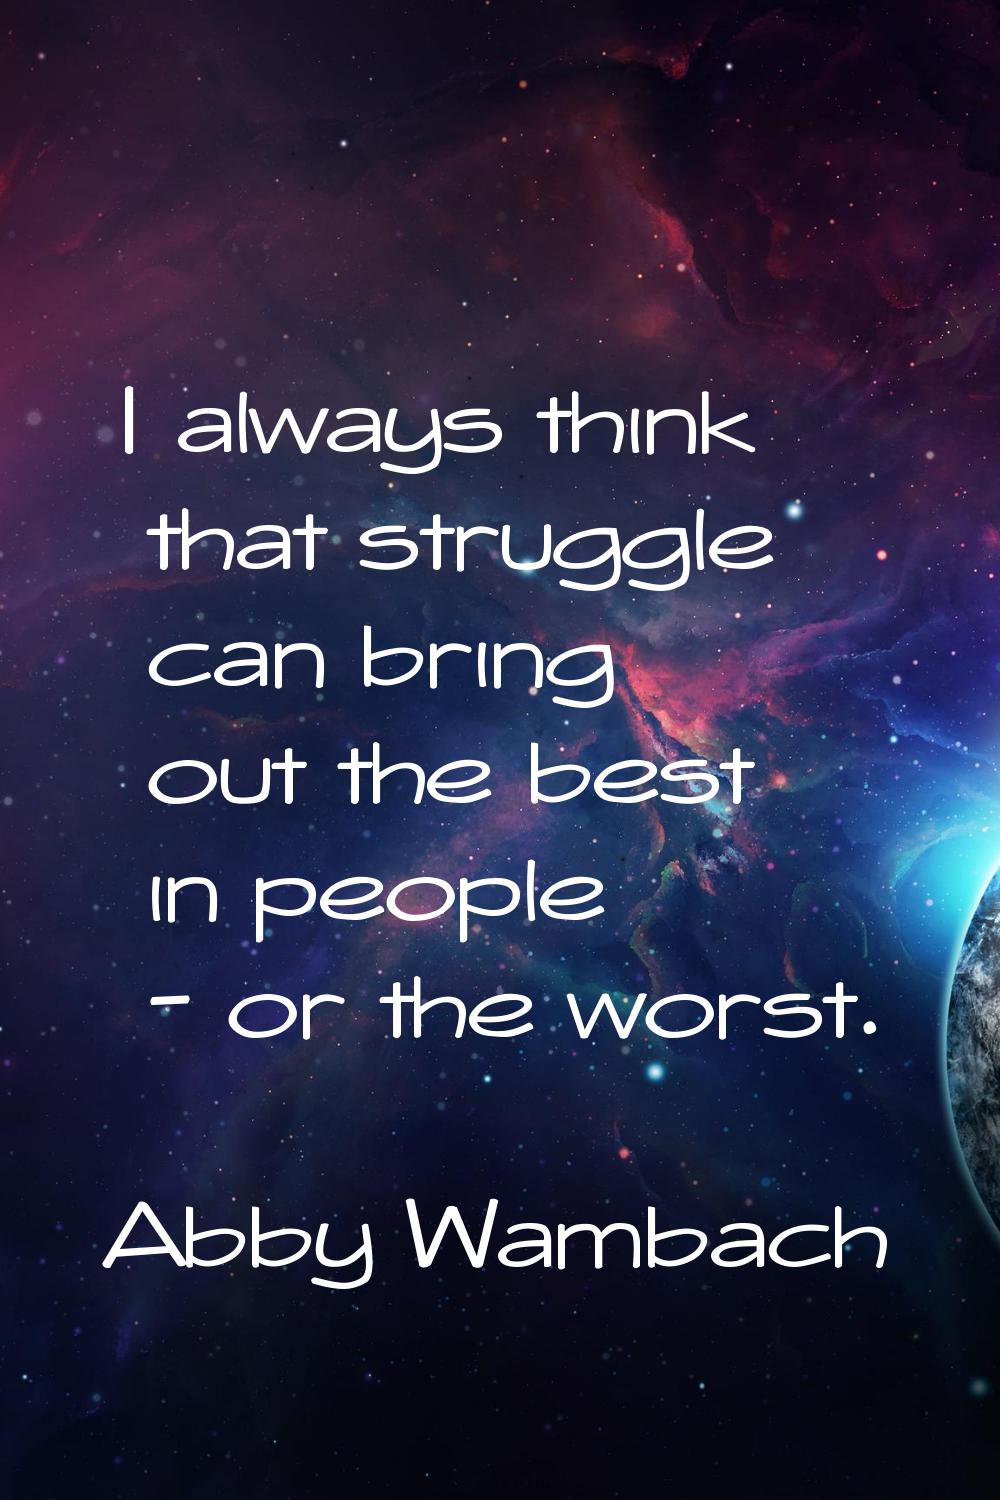 I always think that struggle can bring out the best in people - or the worst.